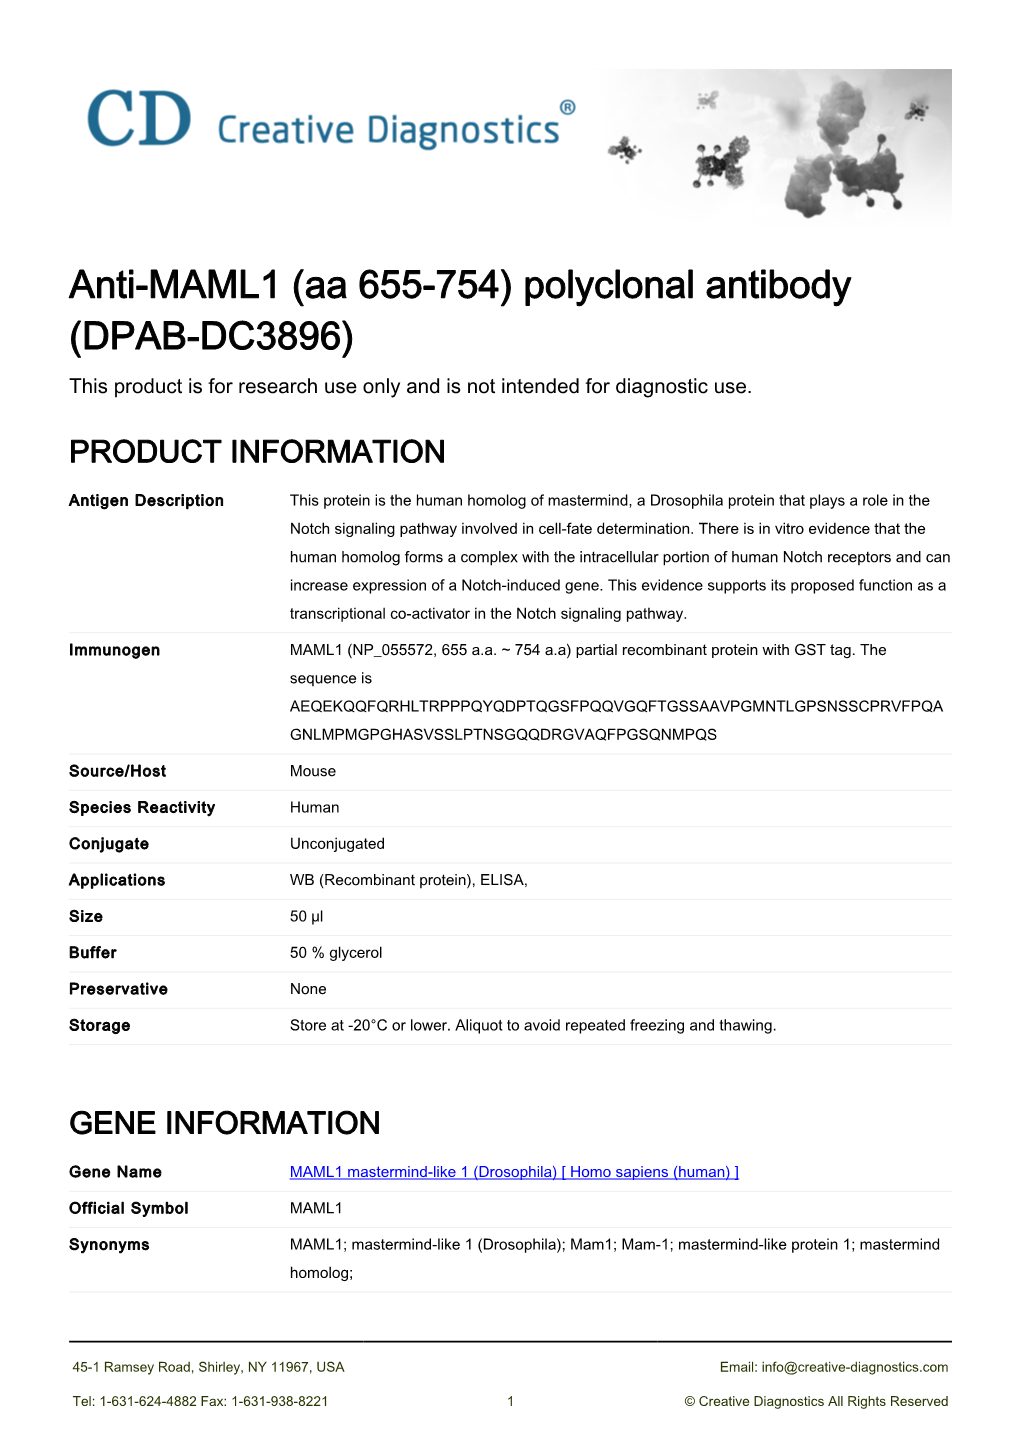 Anti-MAML1 (Aa 655-754) Polyclonal Antibody (DPAB-DC3896) This Product Is for Research Use Only and Is Not Intended for Diagnostic Use